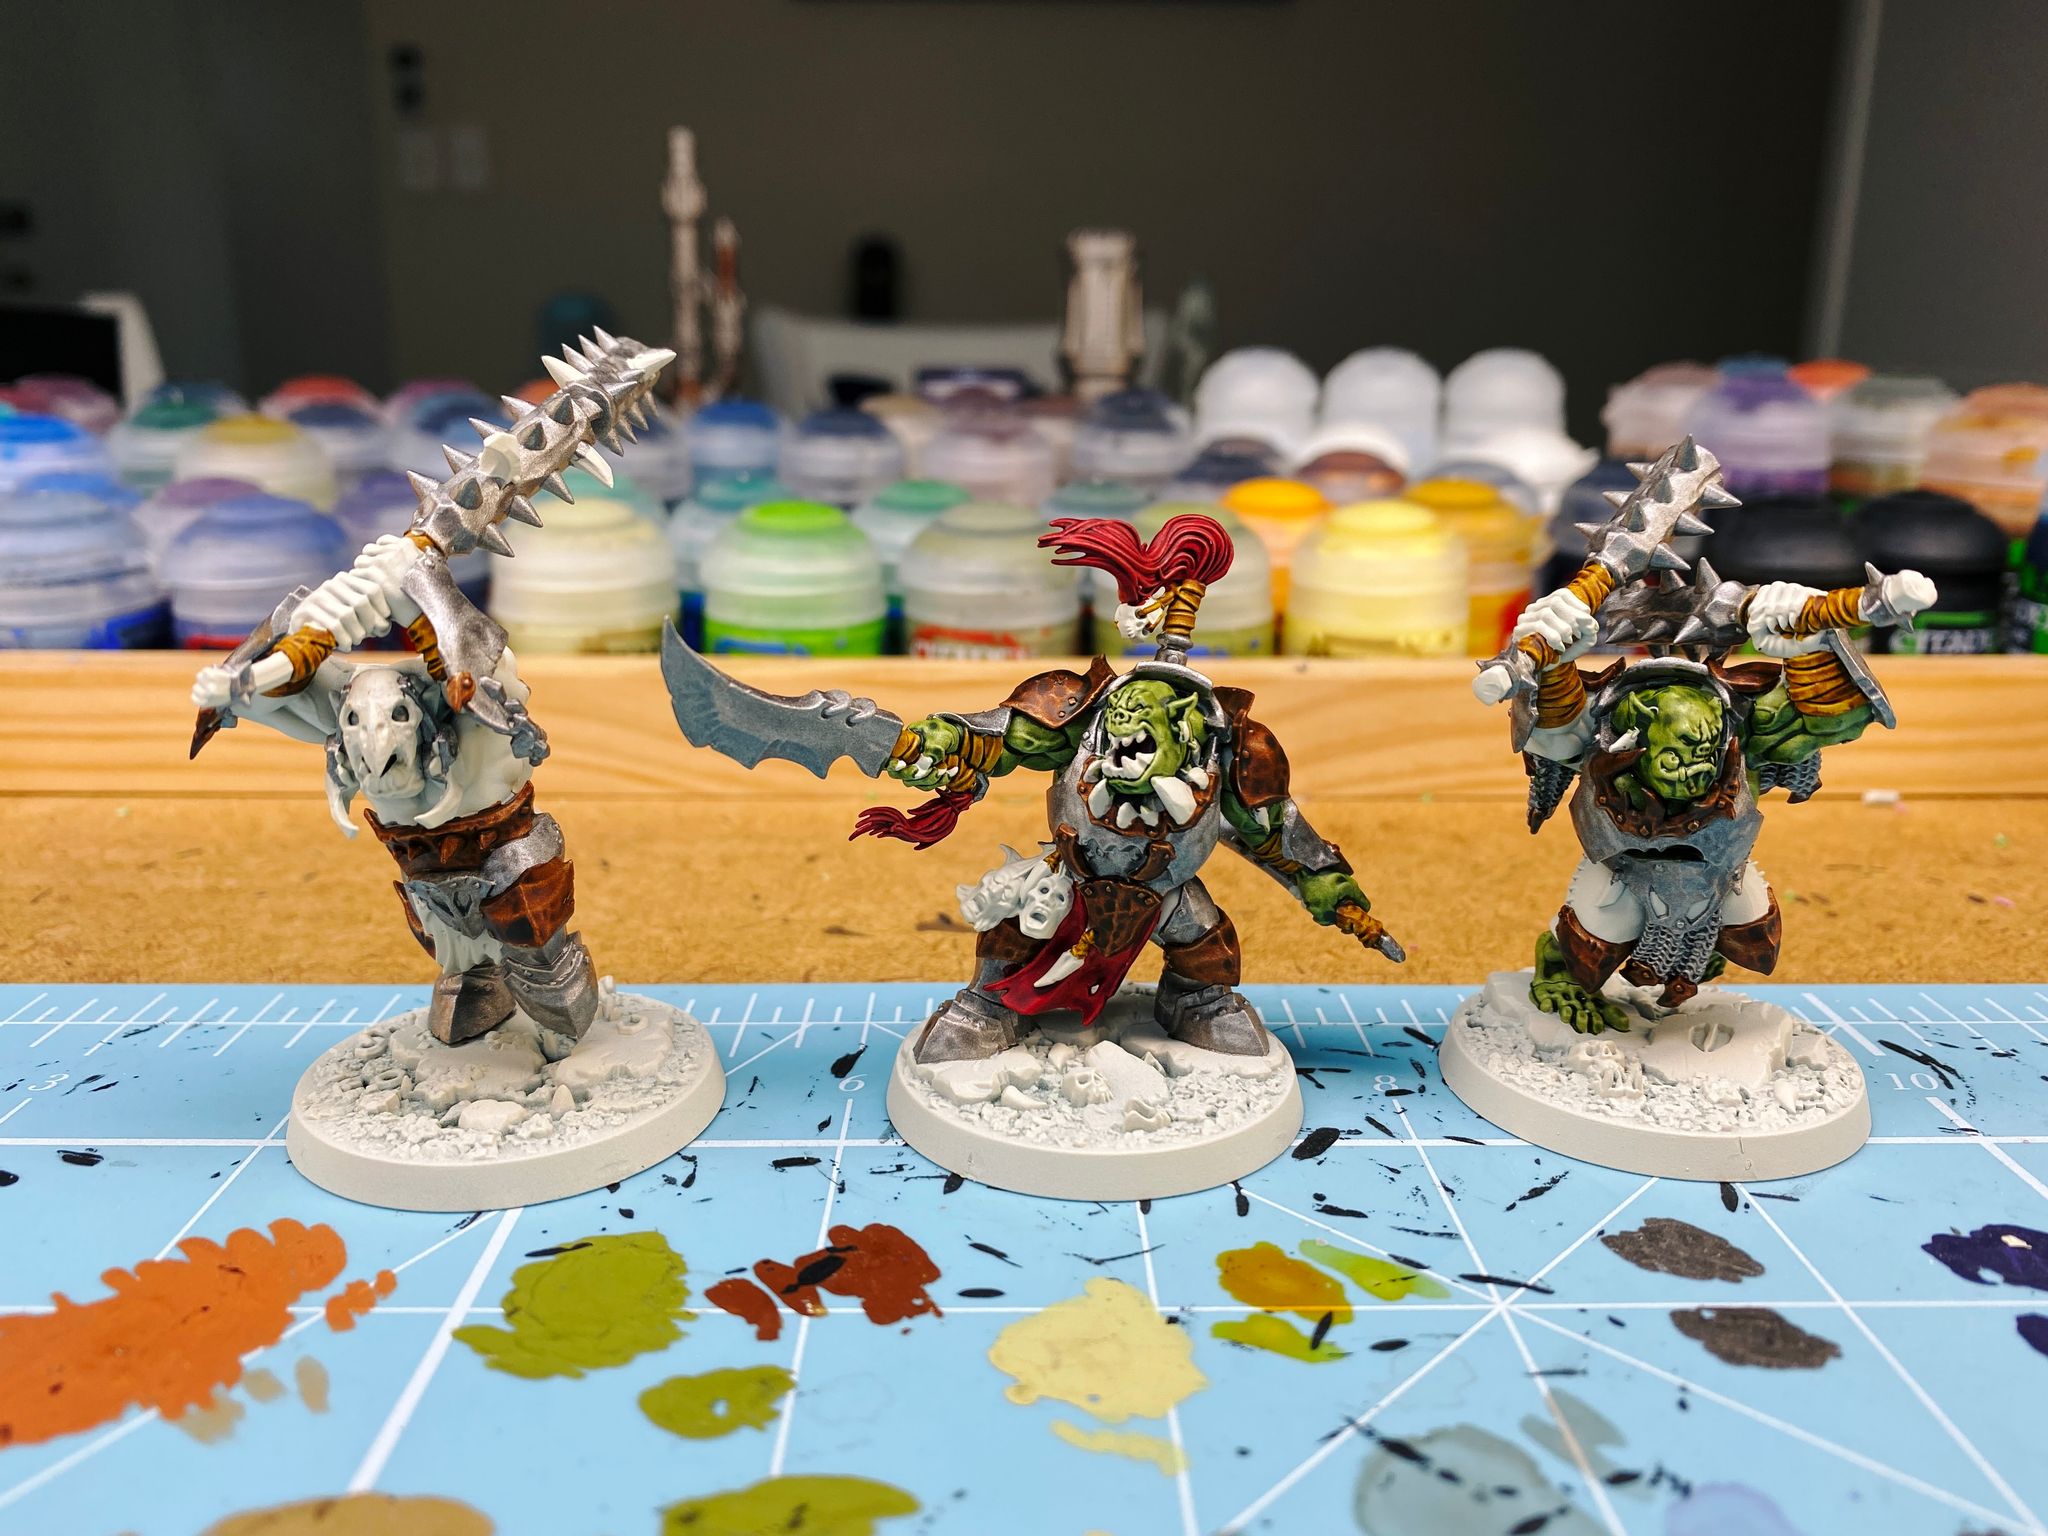 A photo of three partially painted "orruks" (Games Workshop speak for orks), the Morgok's Krushas warband from Warhammer Underworlds. They're all in battered-looking dark metal and bronze armour, the leader is pointing a sword and roaring, and the other two are mid-weapon swing. Two of the three have their green skin painted.